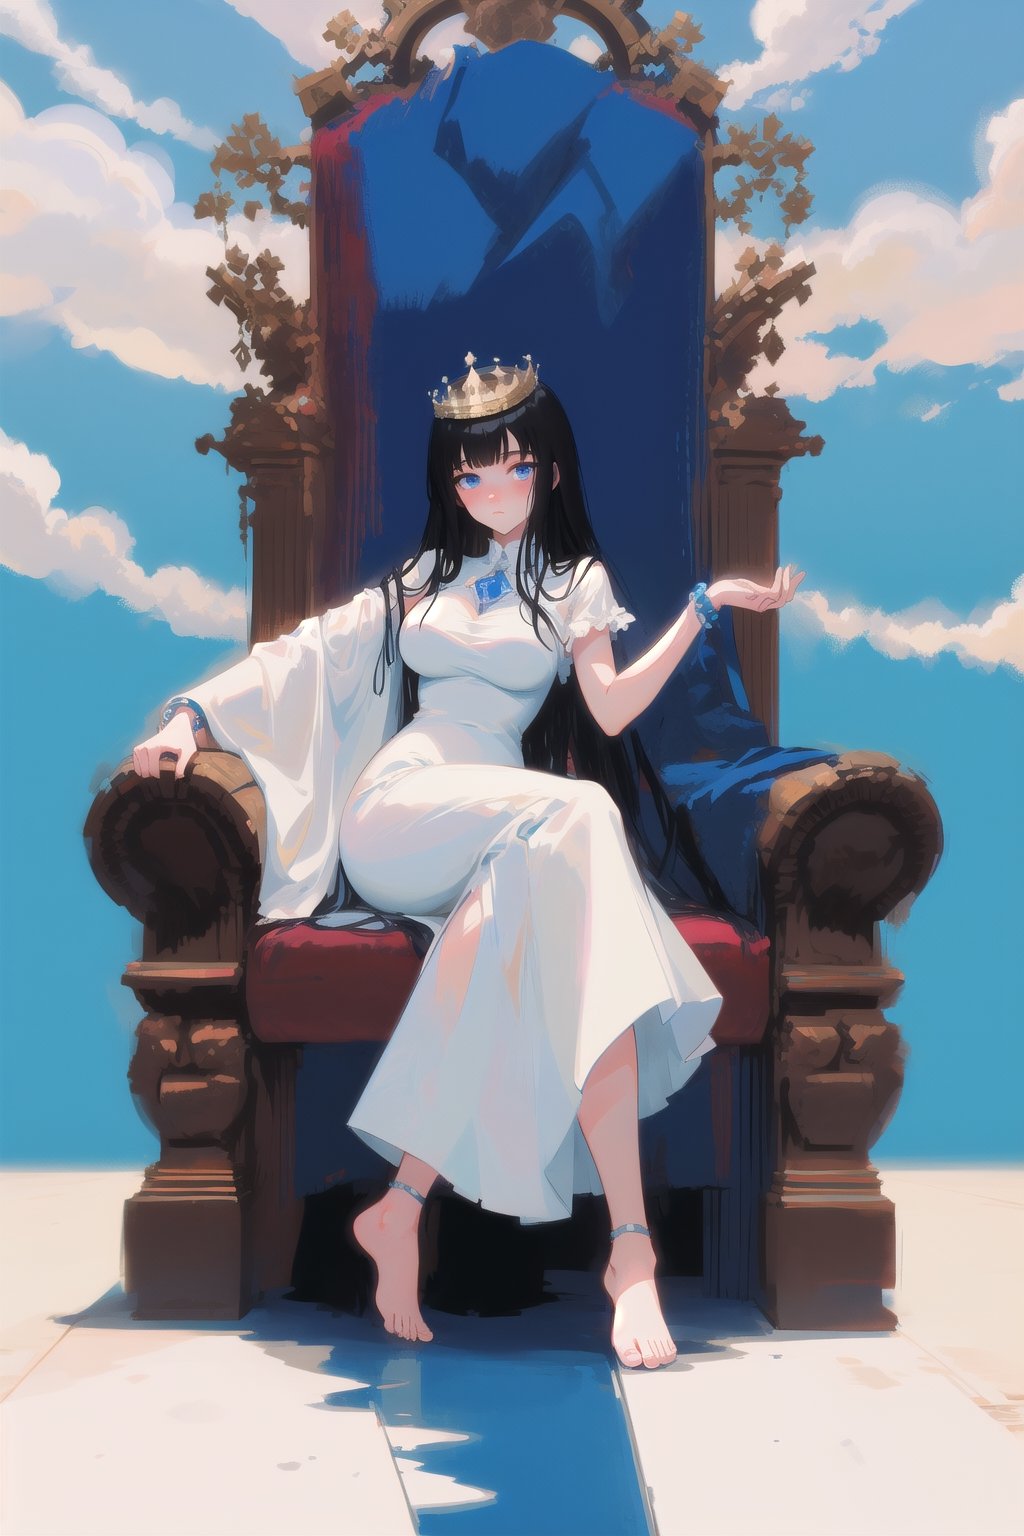 Goddess resting on her throne, calm, blue colors, simple white dress, black hair, big throne, heaven, aura crown, clouds, reflective floor, sky, jewelery, bracelet, bored goddess, barefoot, resting in big throne, large breasts, simple dress, full body, 1girl, long hair, blue eyes, imposing, large throne,